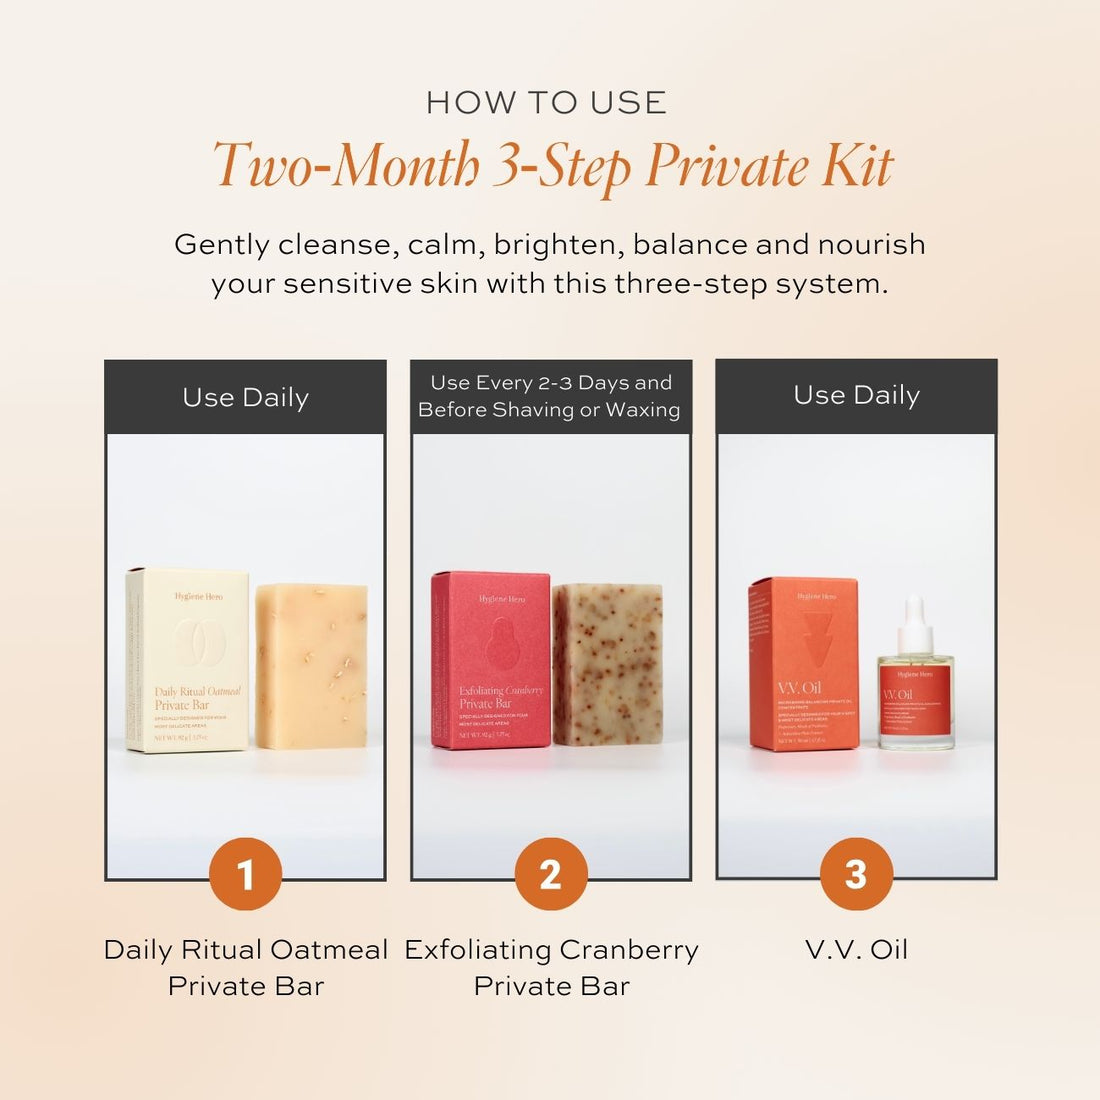 Two-Month 3-Step Private Kit